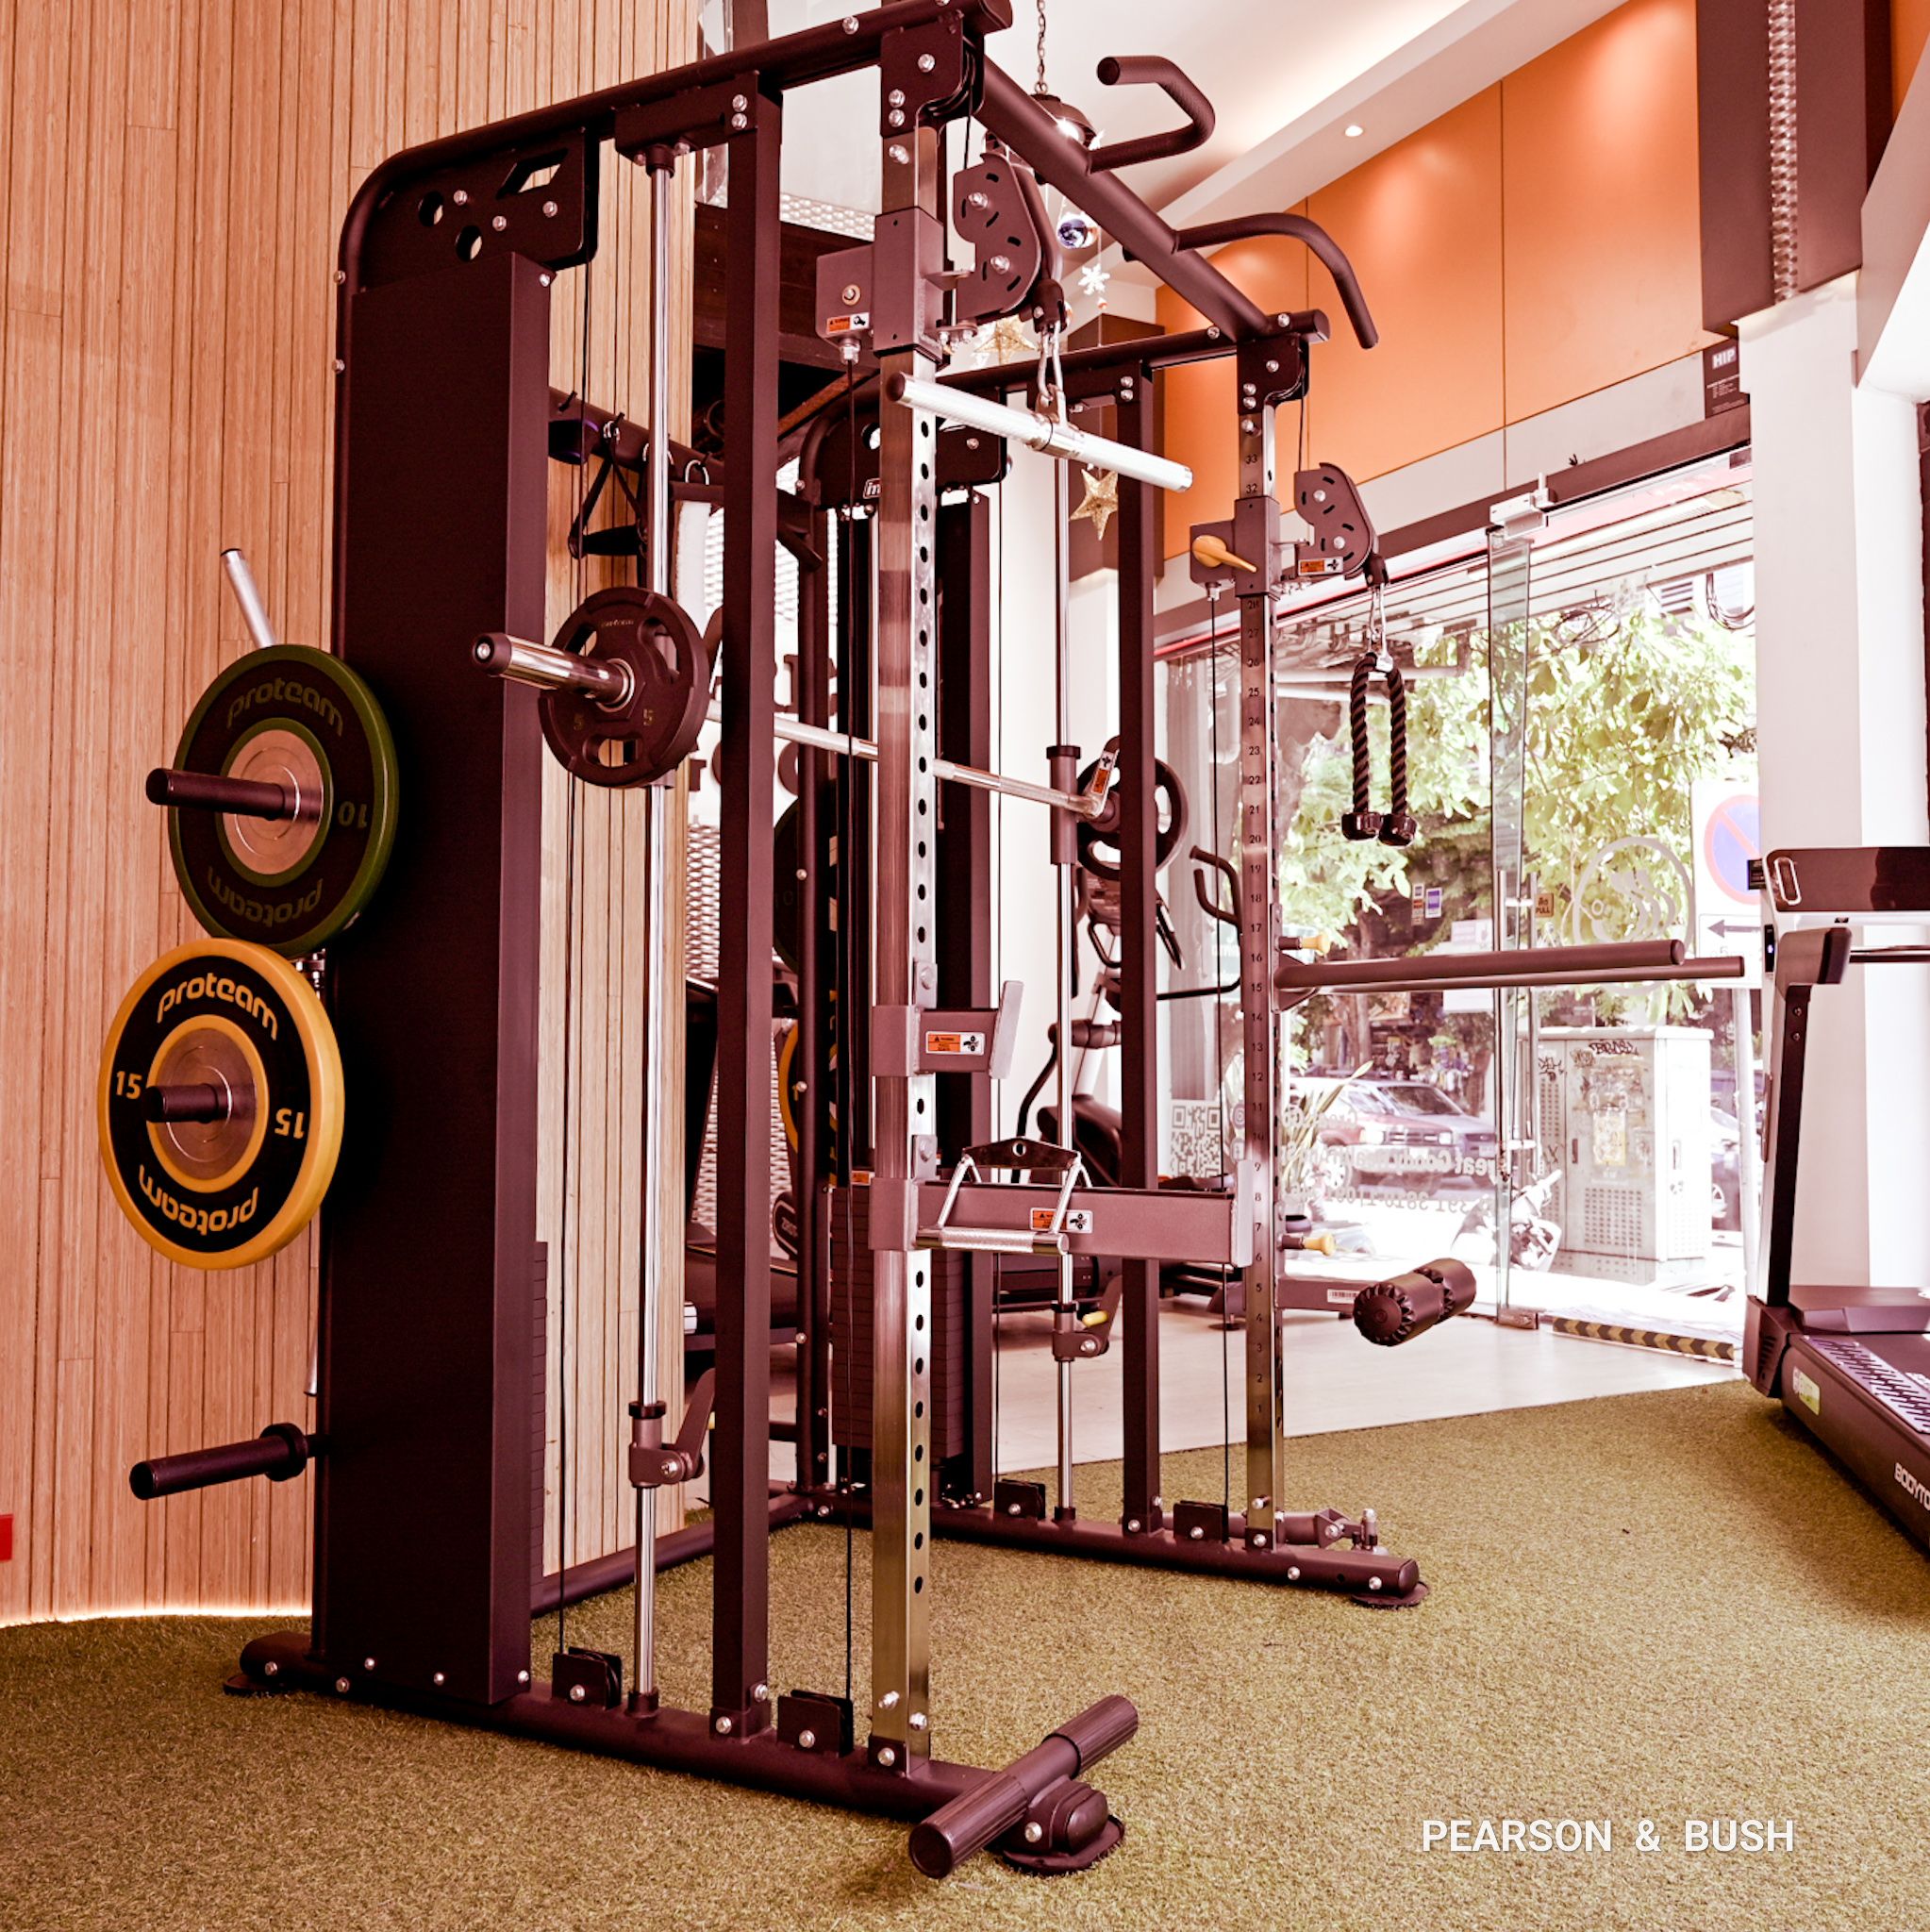 ES2100 Multi-Functional Trainer with Smith เครื่องบริหารกล้ามเนื้อรวม -> Multi-Functional Dual Pulley + Selectorized

Hard chrome plated guide rod

Cable transmission ratio 1:2,

maximum stroke 2314mm

 

หมายเหตุ : ข้อมูลทั้งหมดอาจมีการเปลี่ยนแปลงจากผู้ผลิต